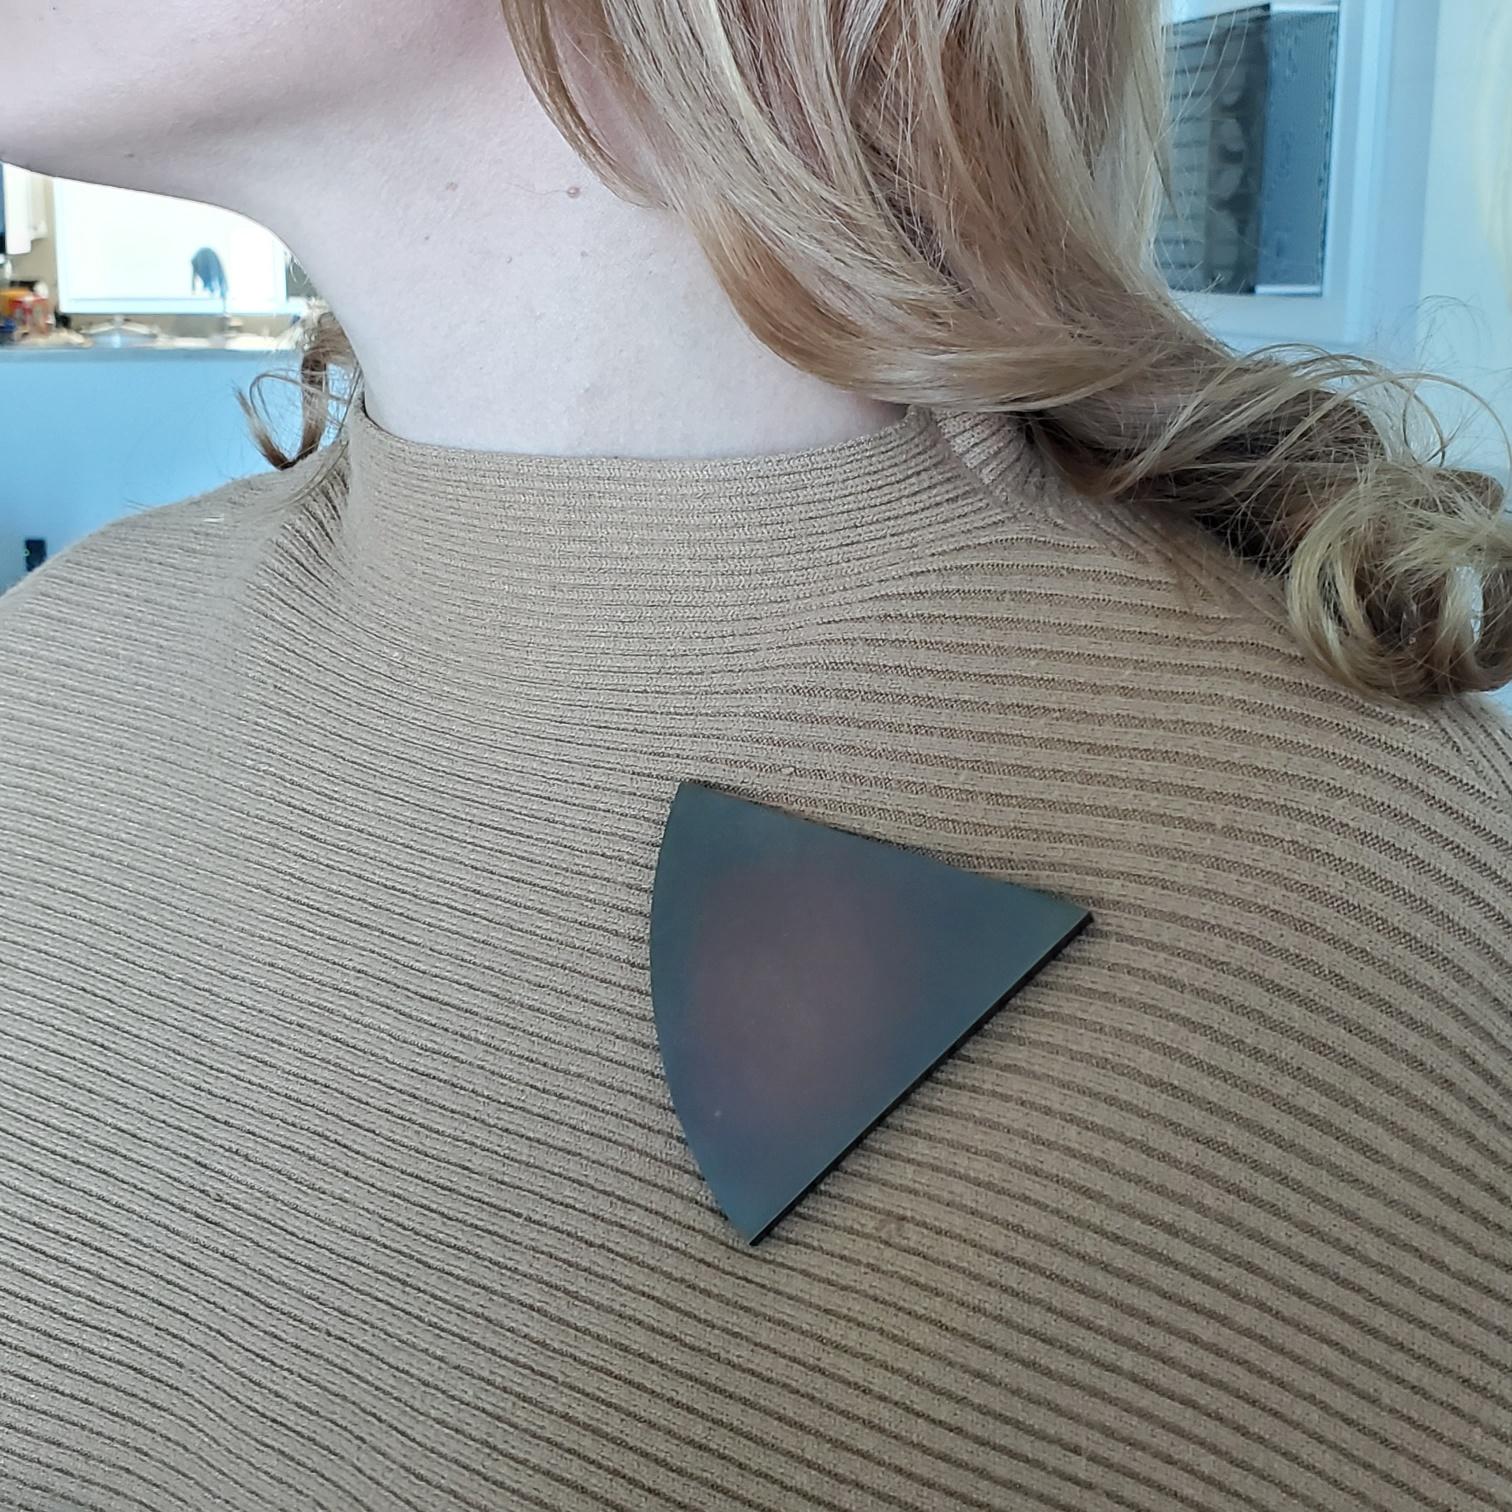 Modernist Thomas Gentille 1970 Geometric Triangular Pendant Brooch In 18kt Gold And Bronze For Sale